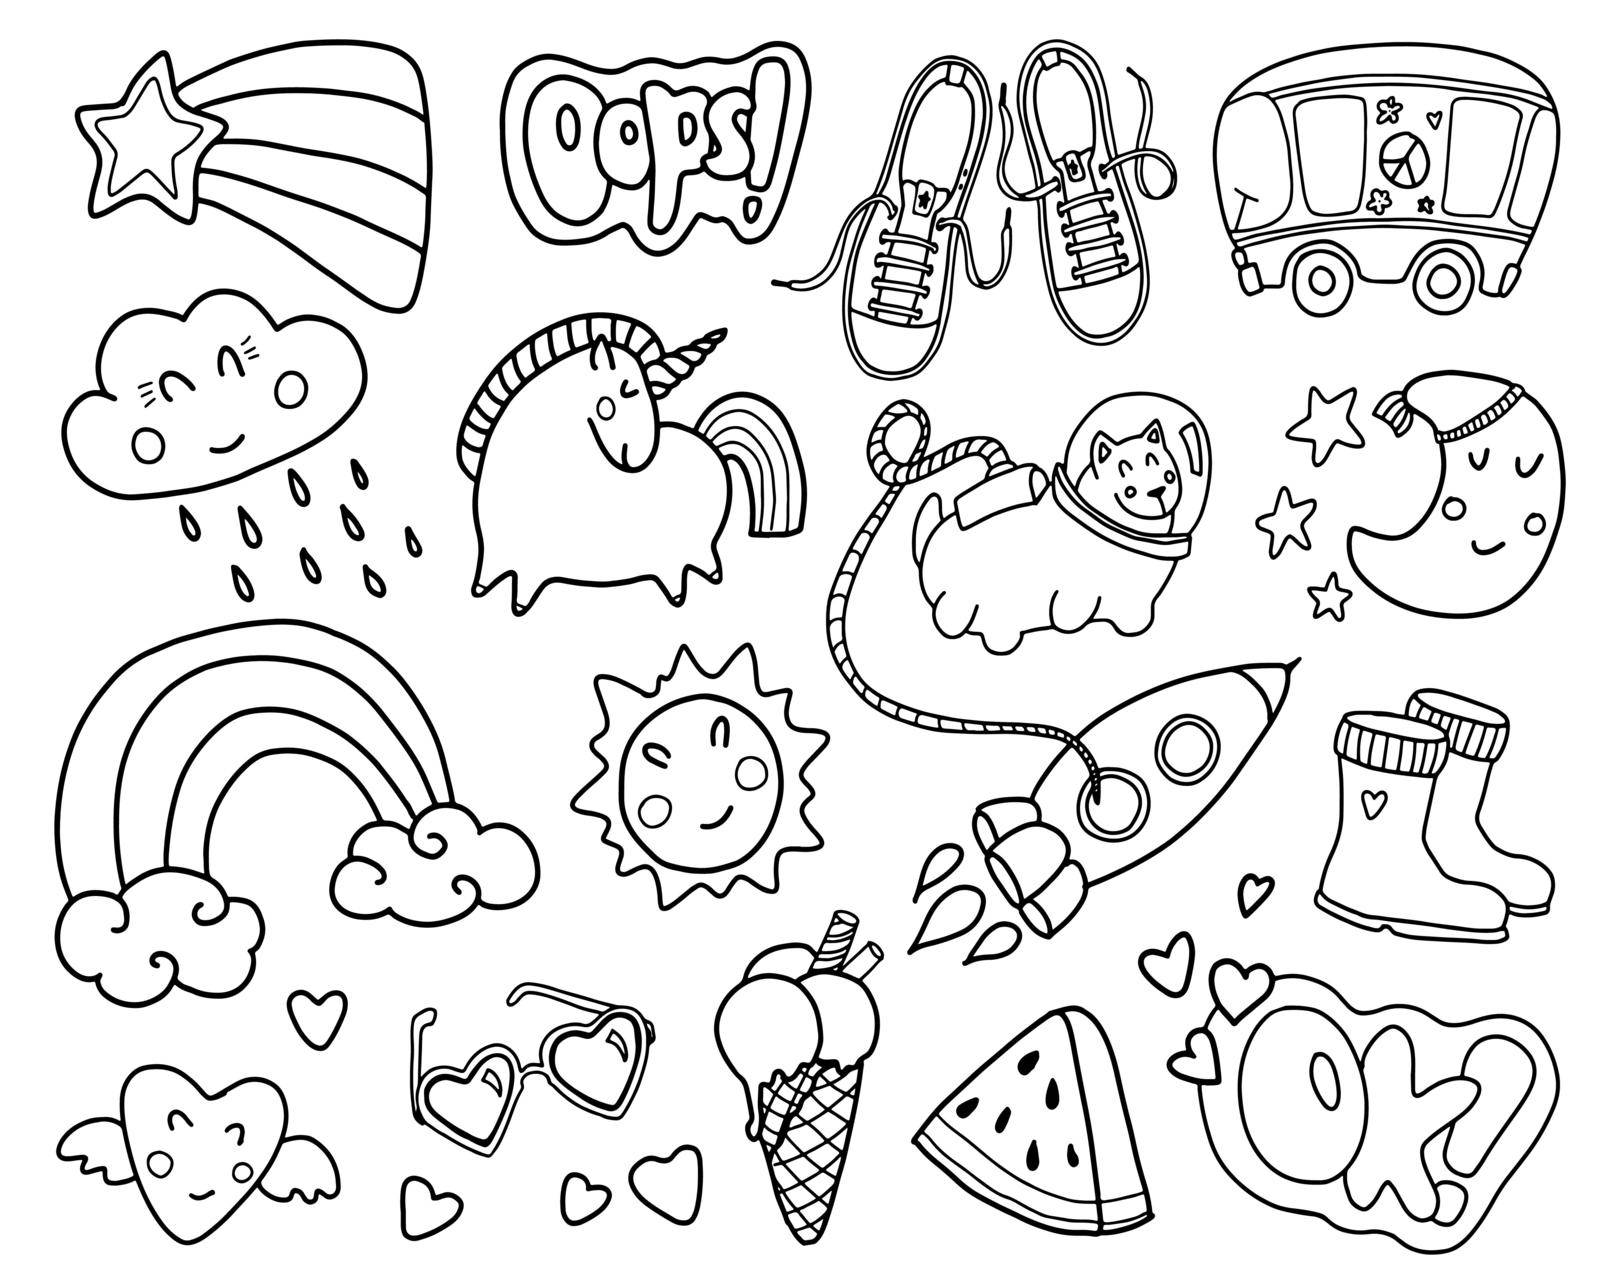 Set of girly graffiti doodles for decoration, stickers or embroidery. Cartoon patch badges or fashion pin badges. Vector illustrations